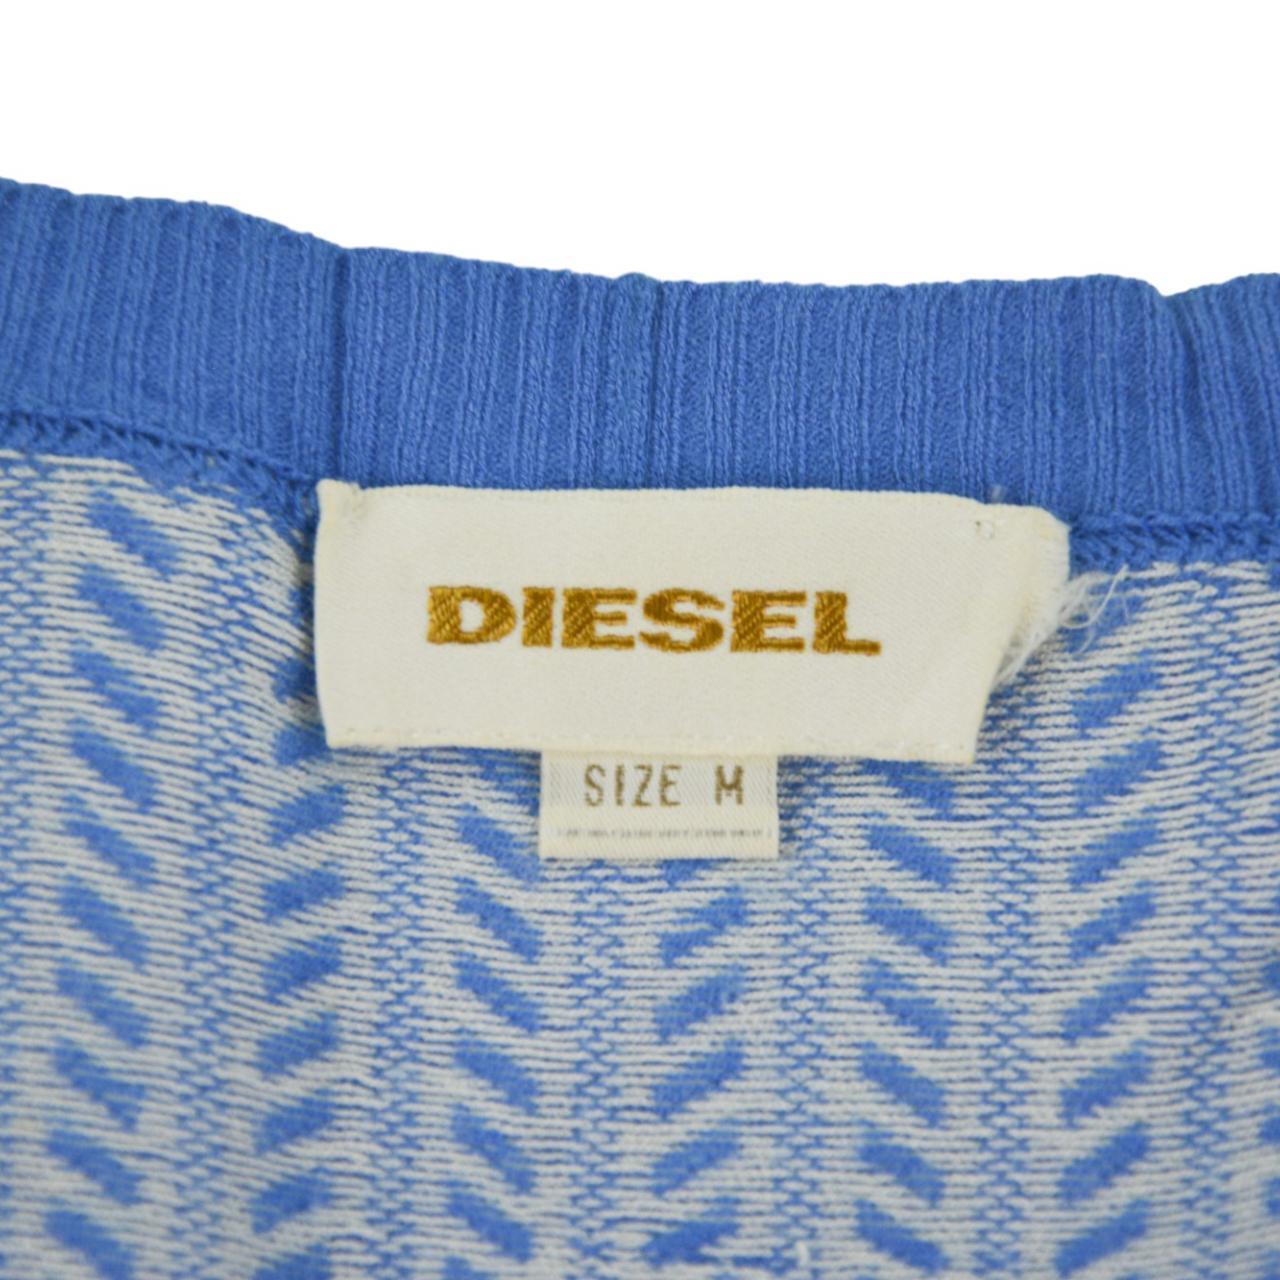 Vintage Diesel Knitted Cardigan Women's Size M - Known Source